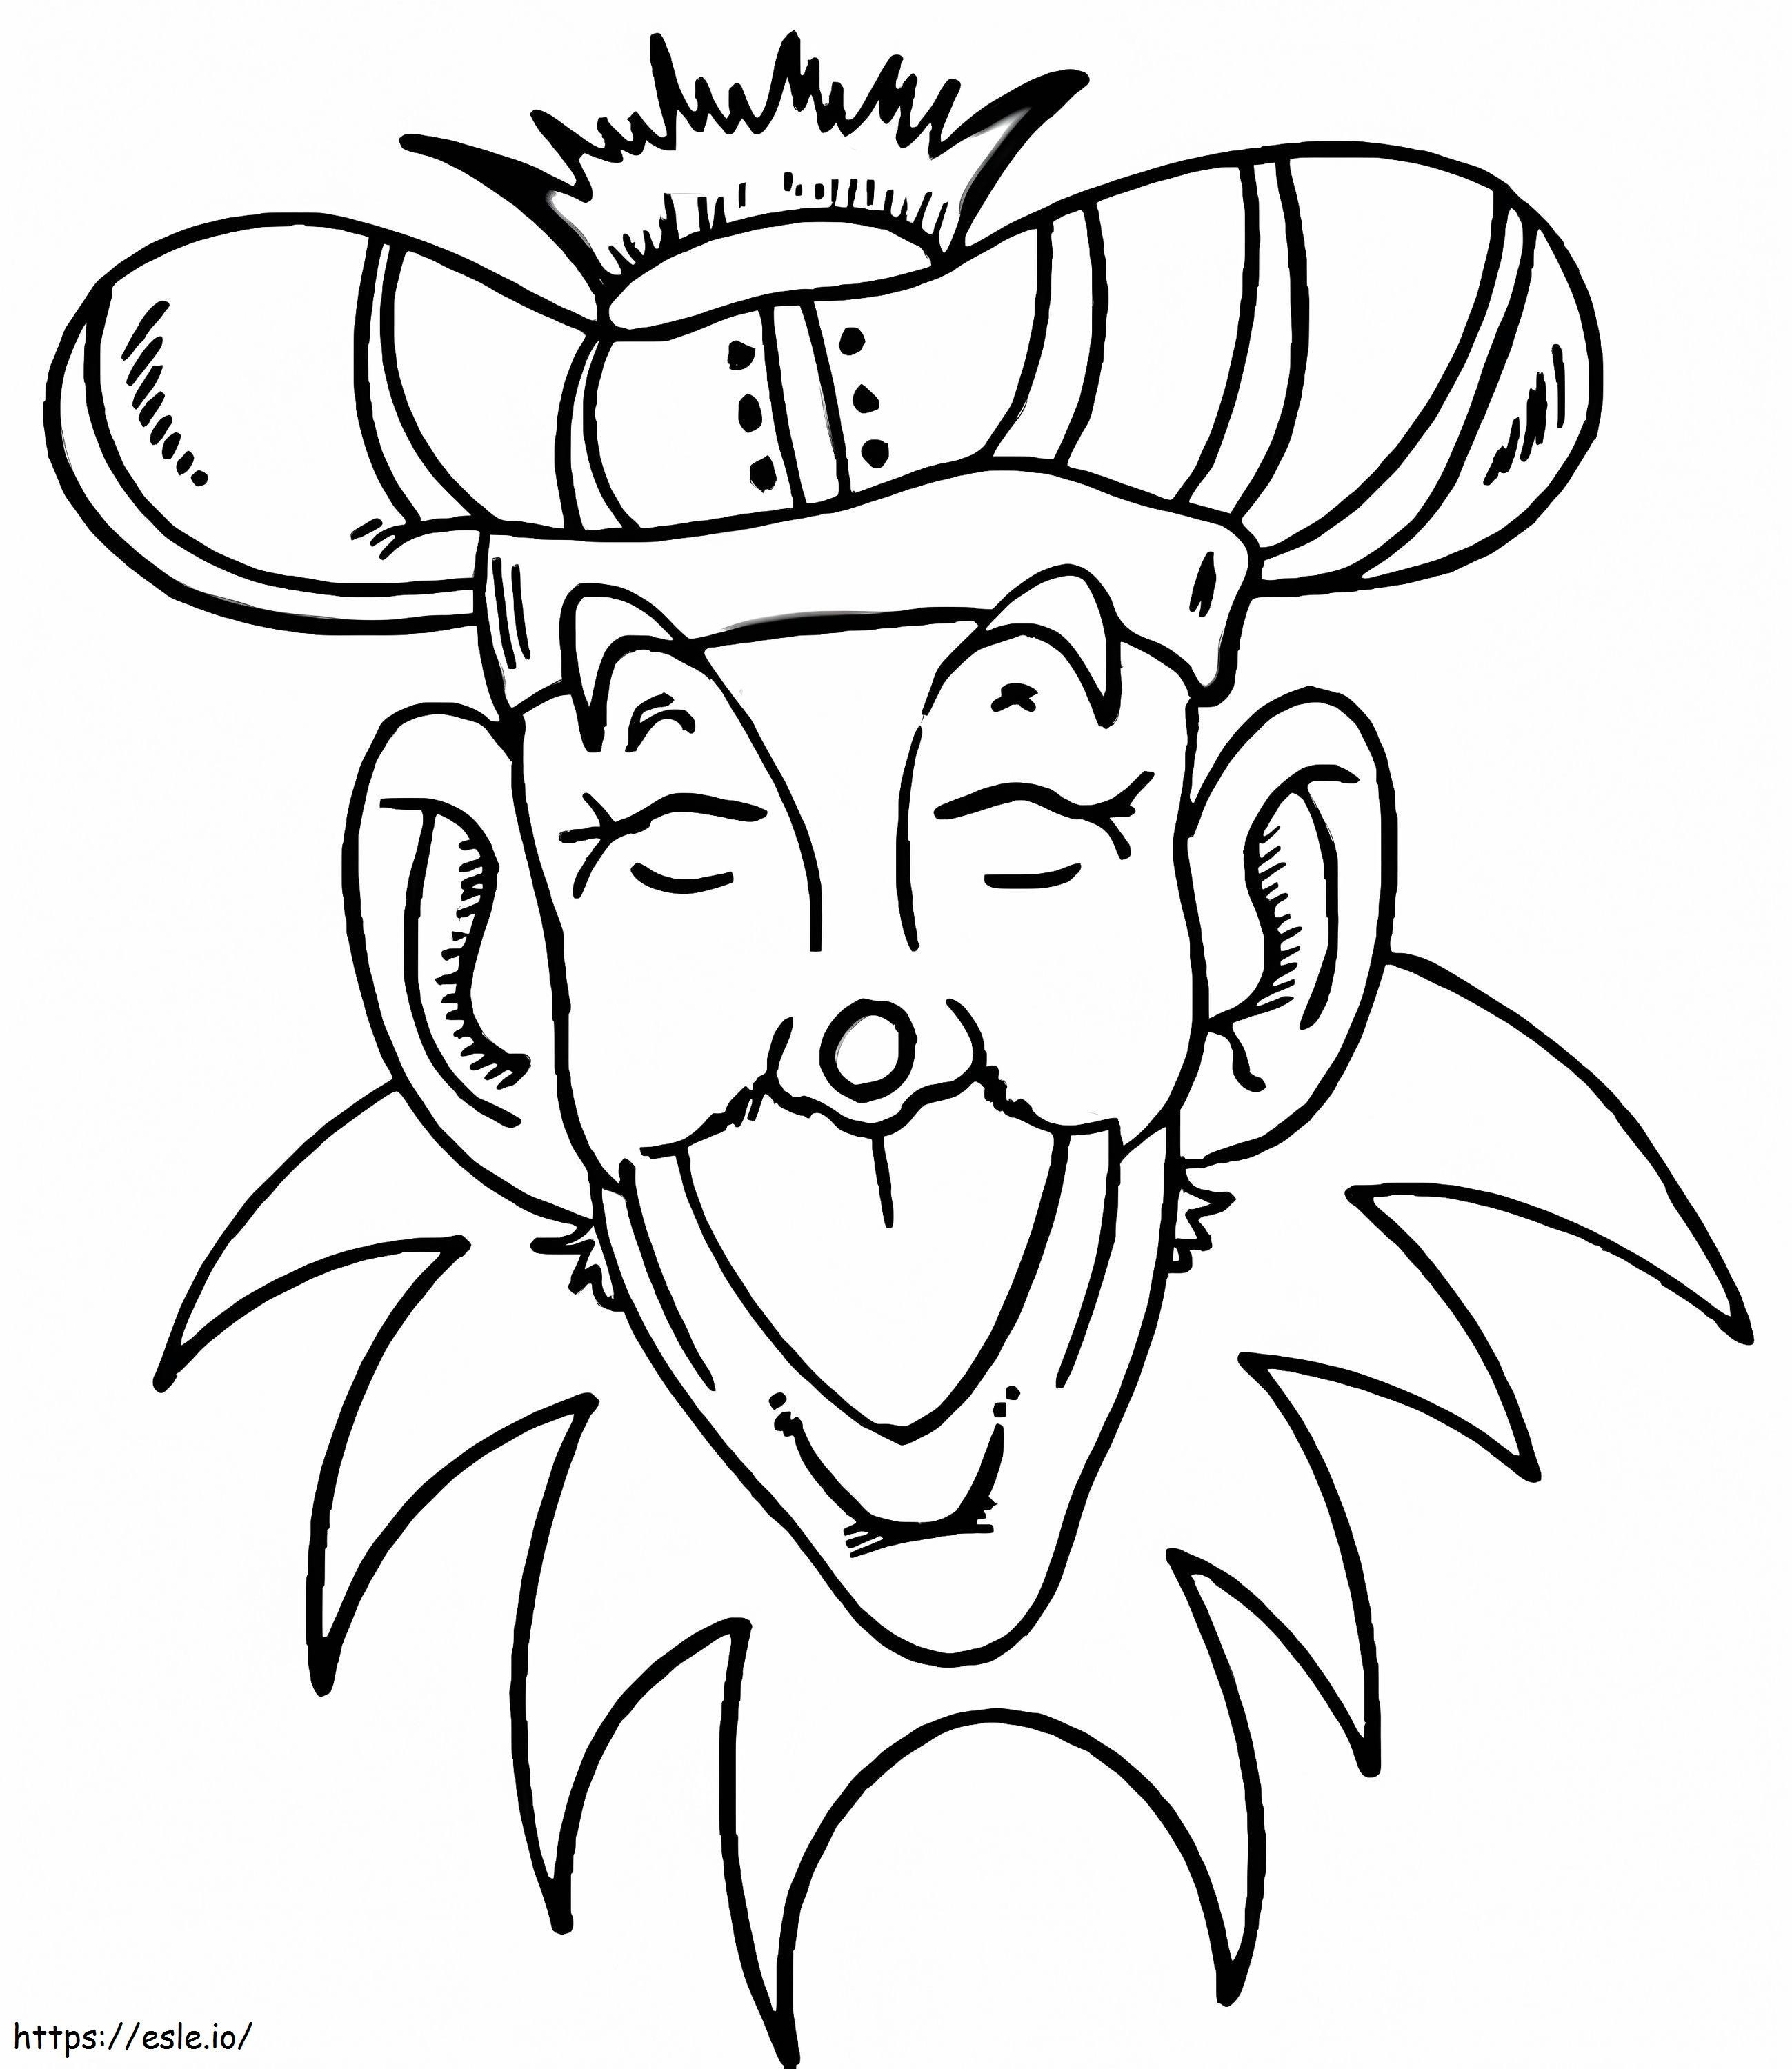 King Of Mardi Gras Festival coloring page